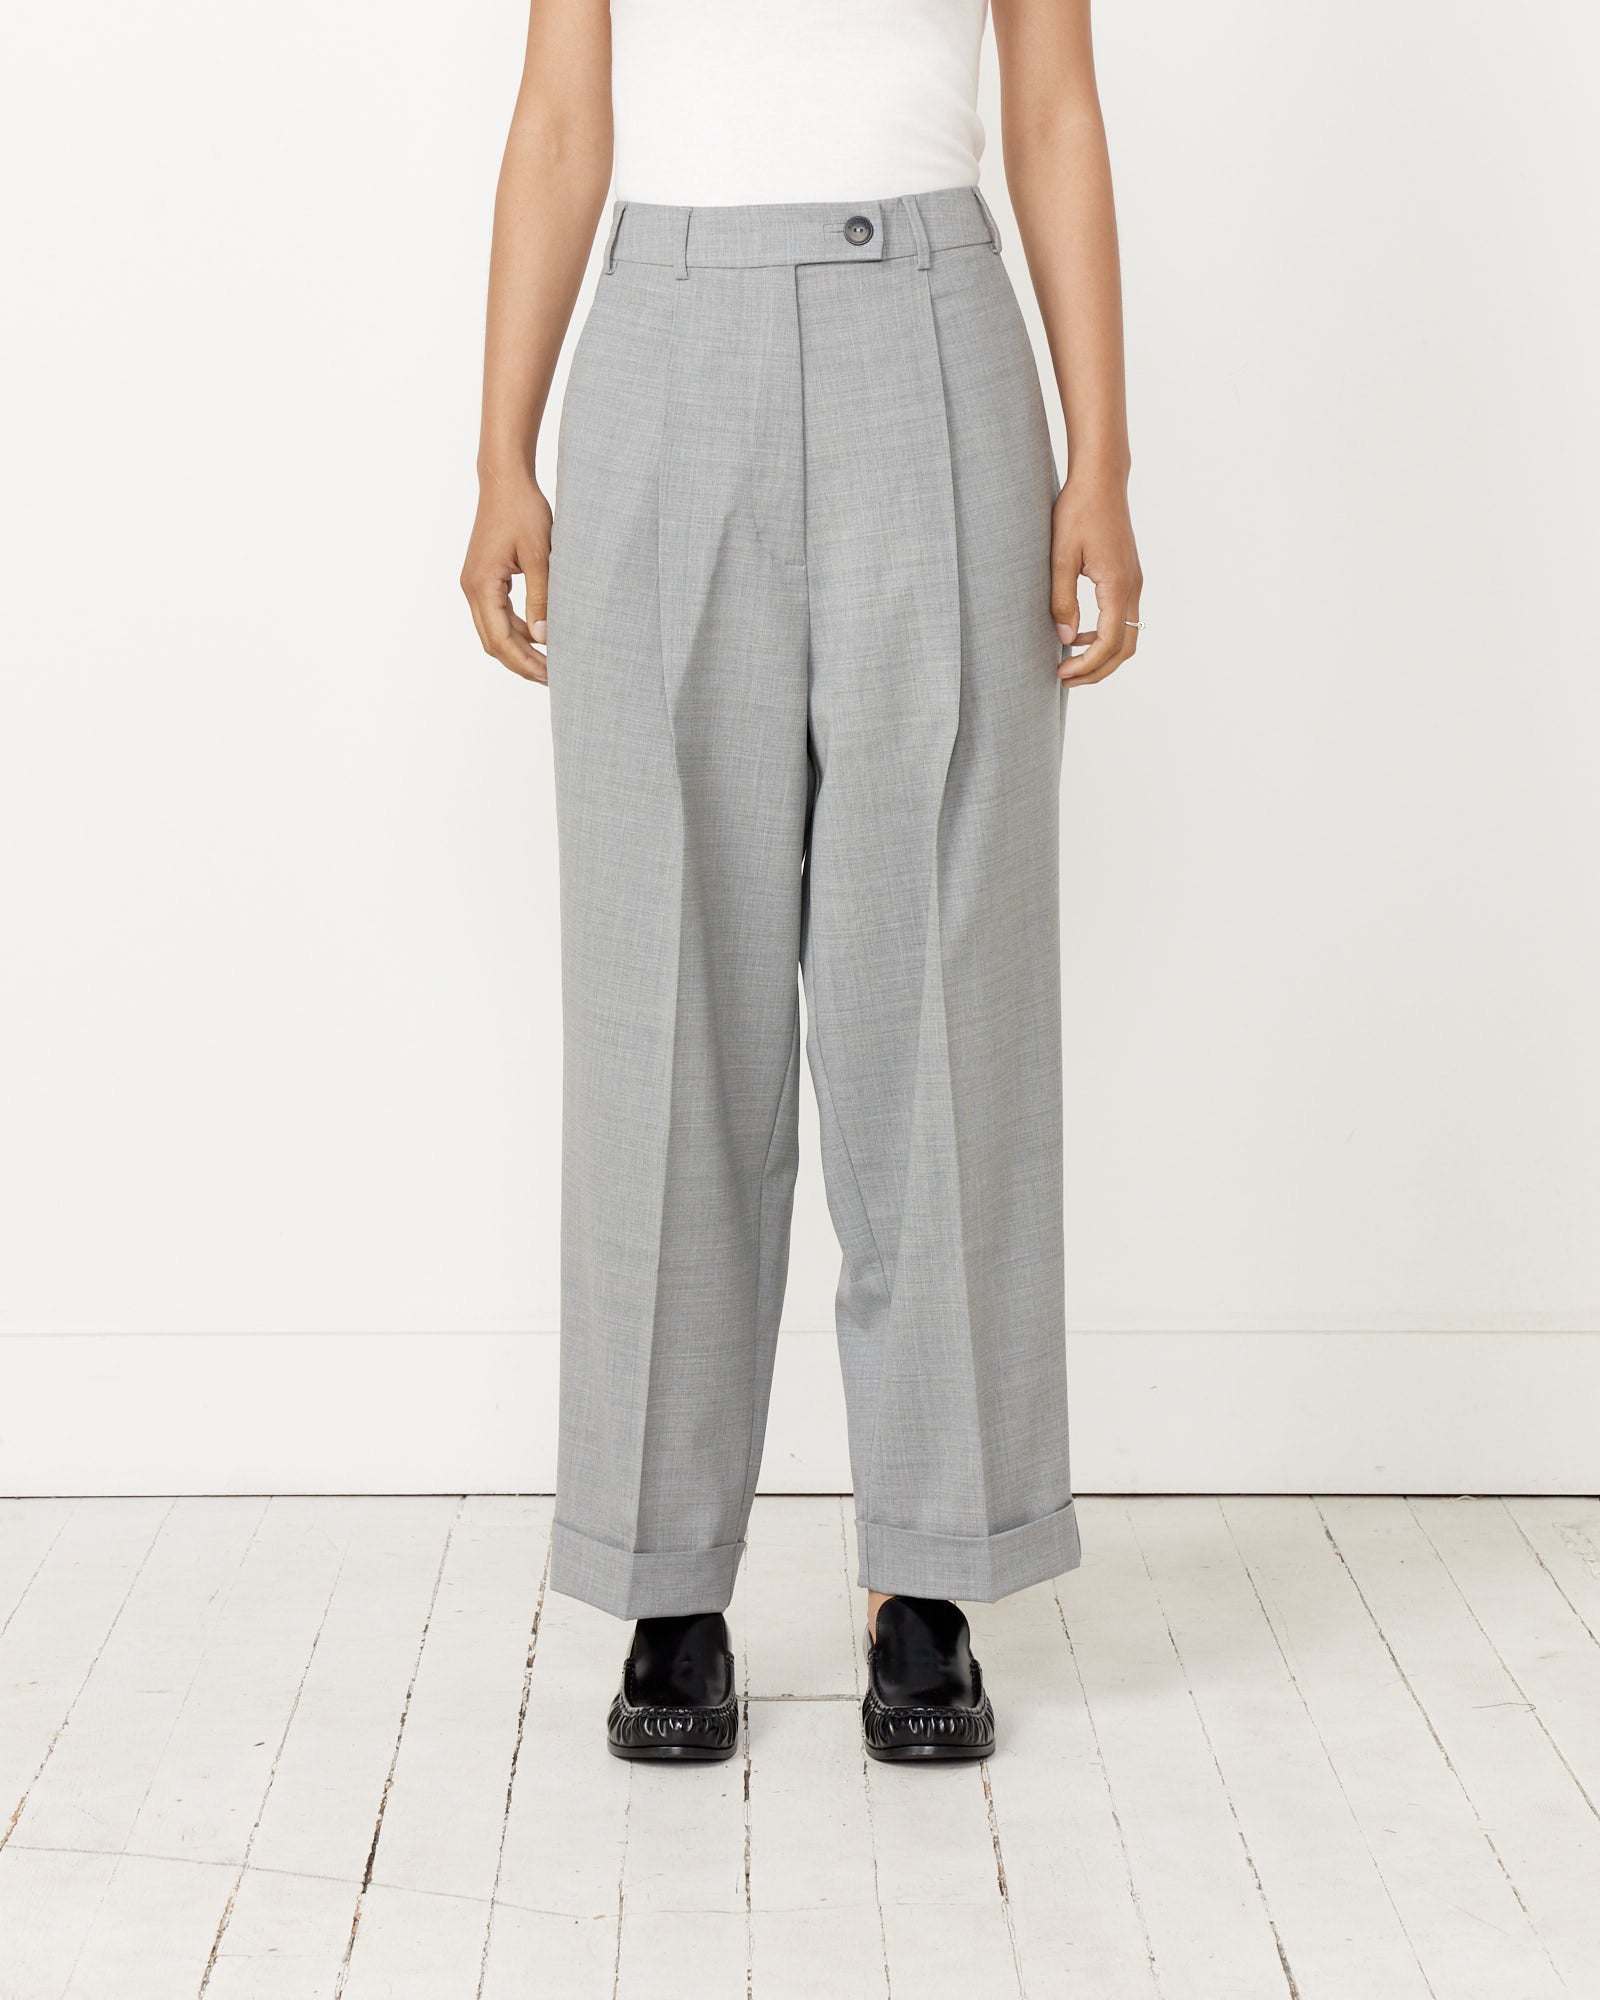 Tailoring Masculine Pants